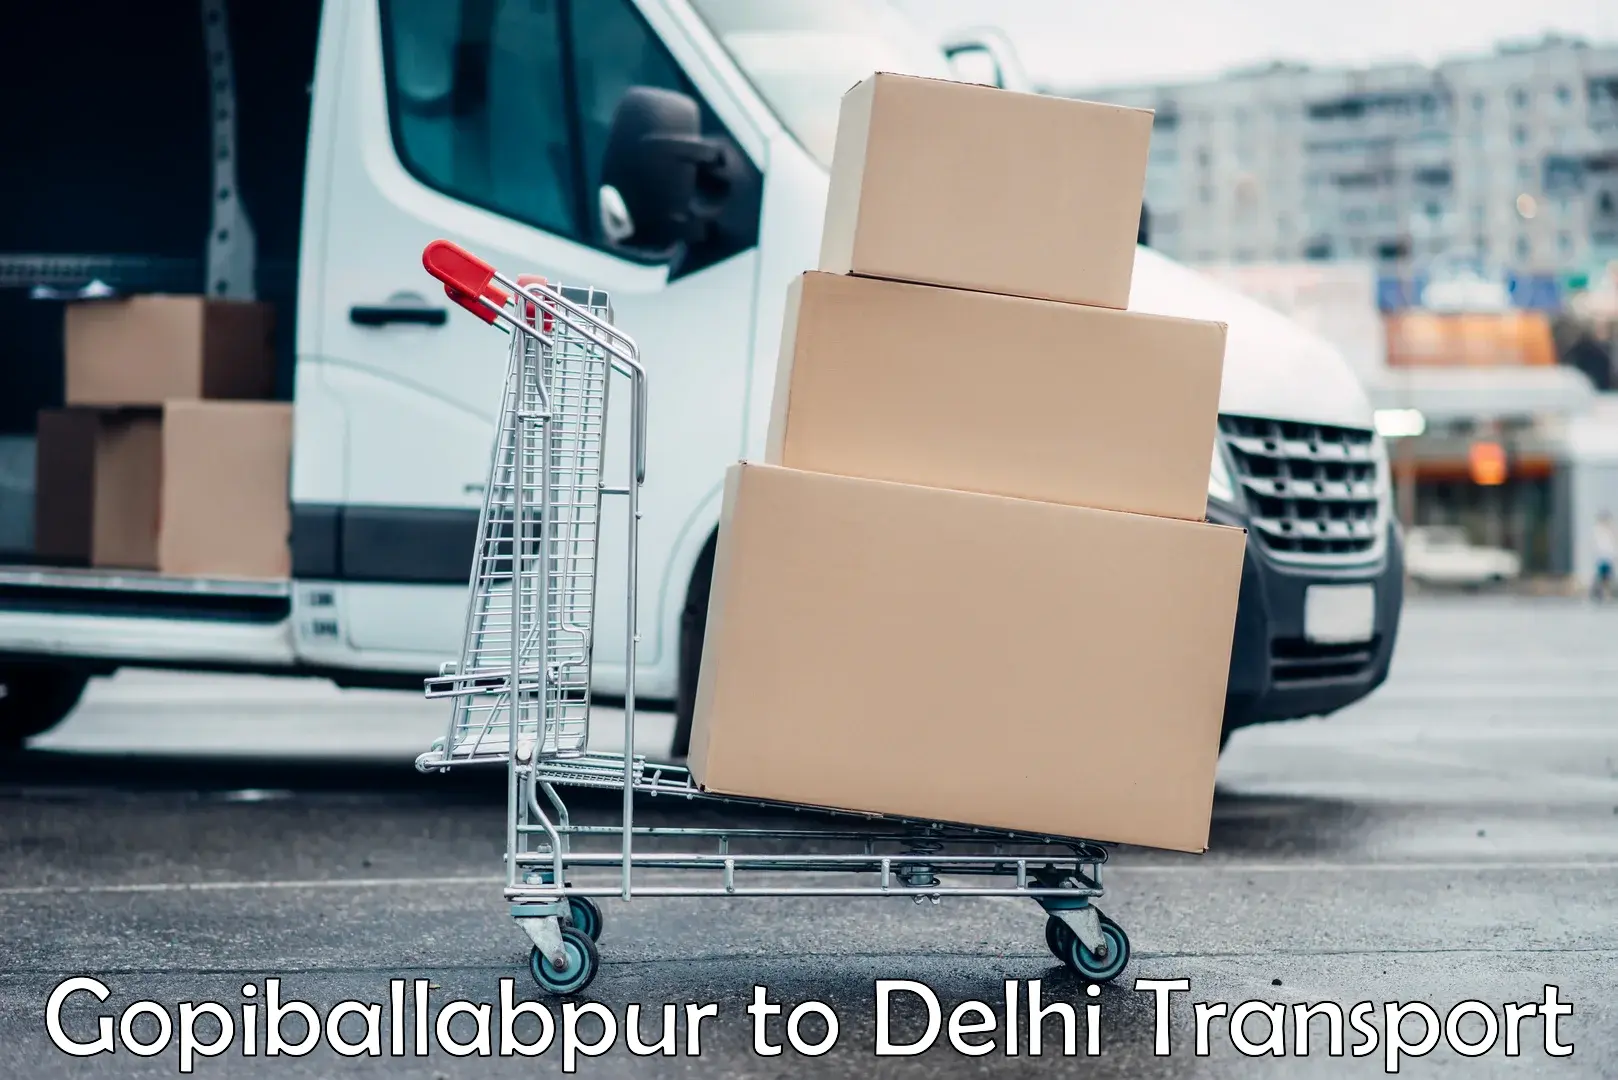 Nearby transport service Gopiballabpur to Lodhi Road